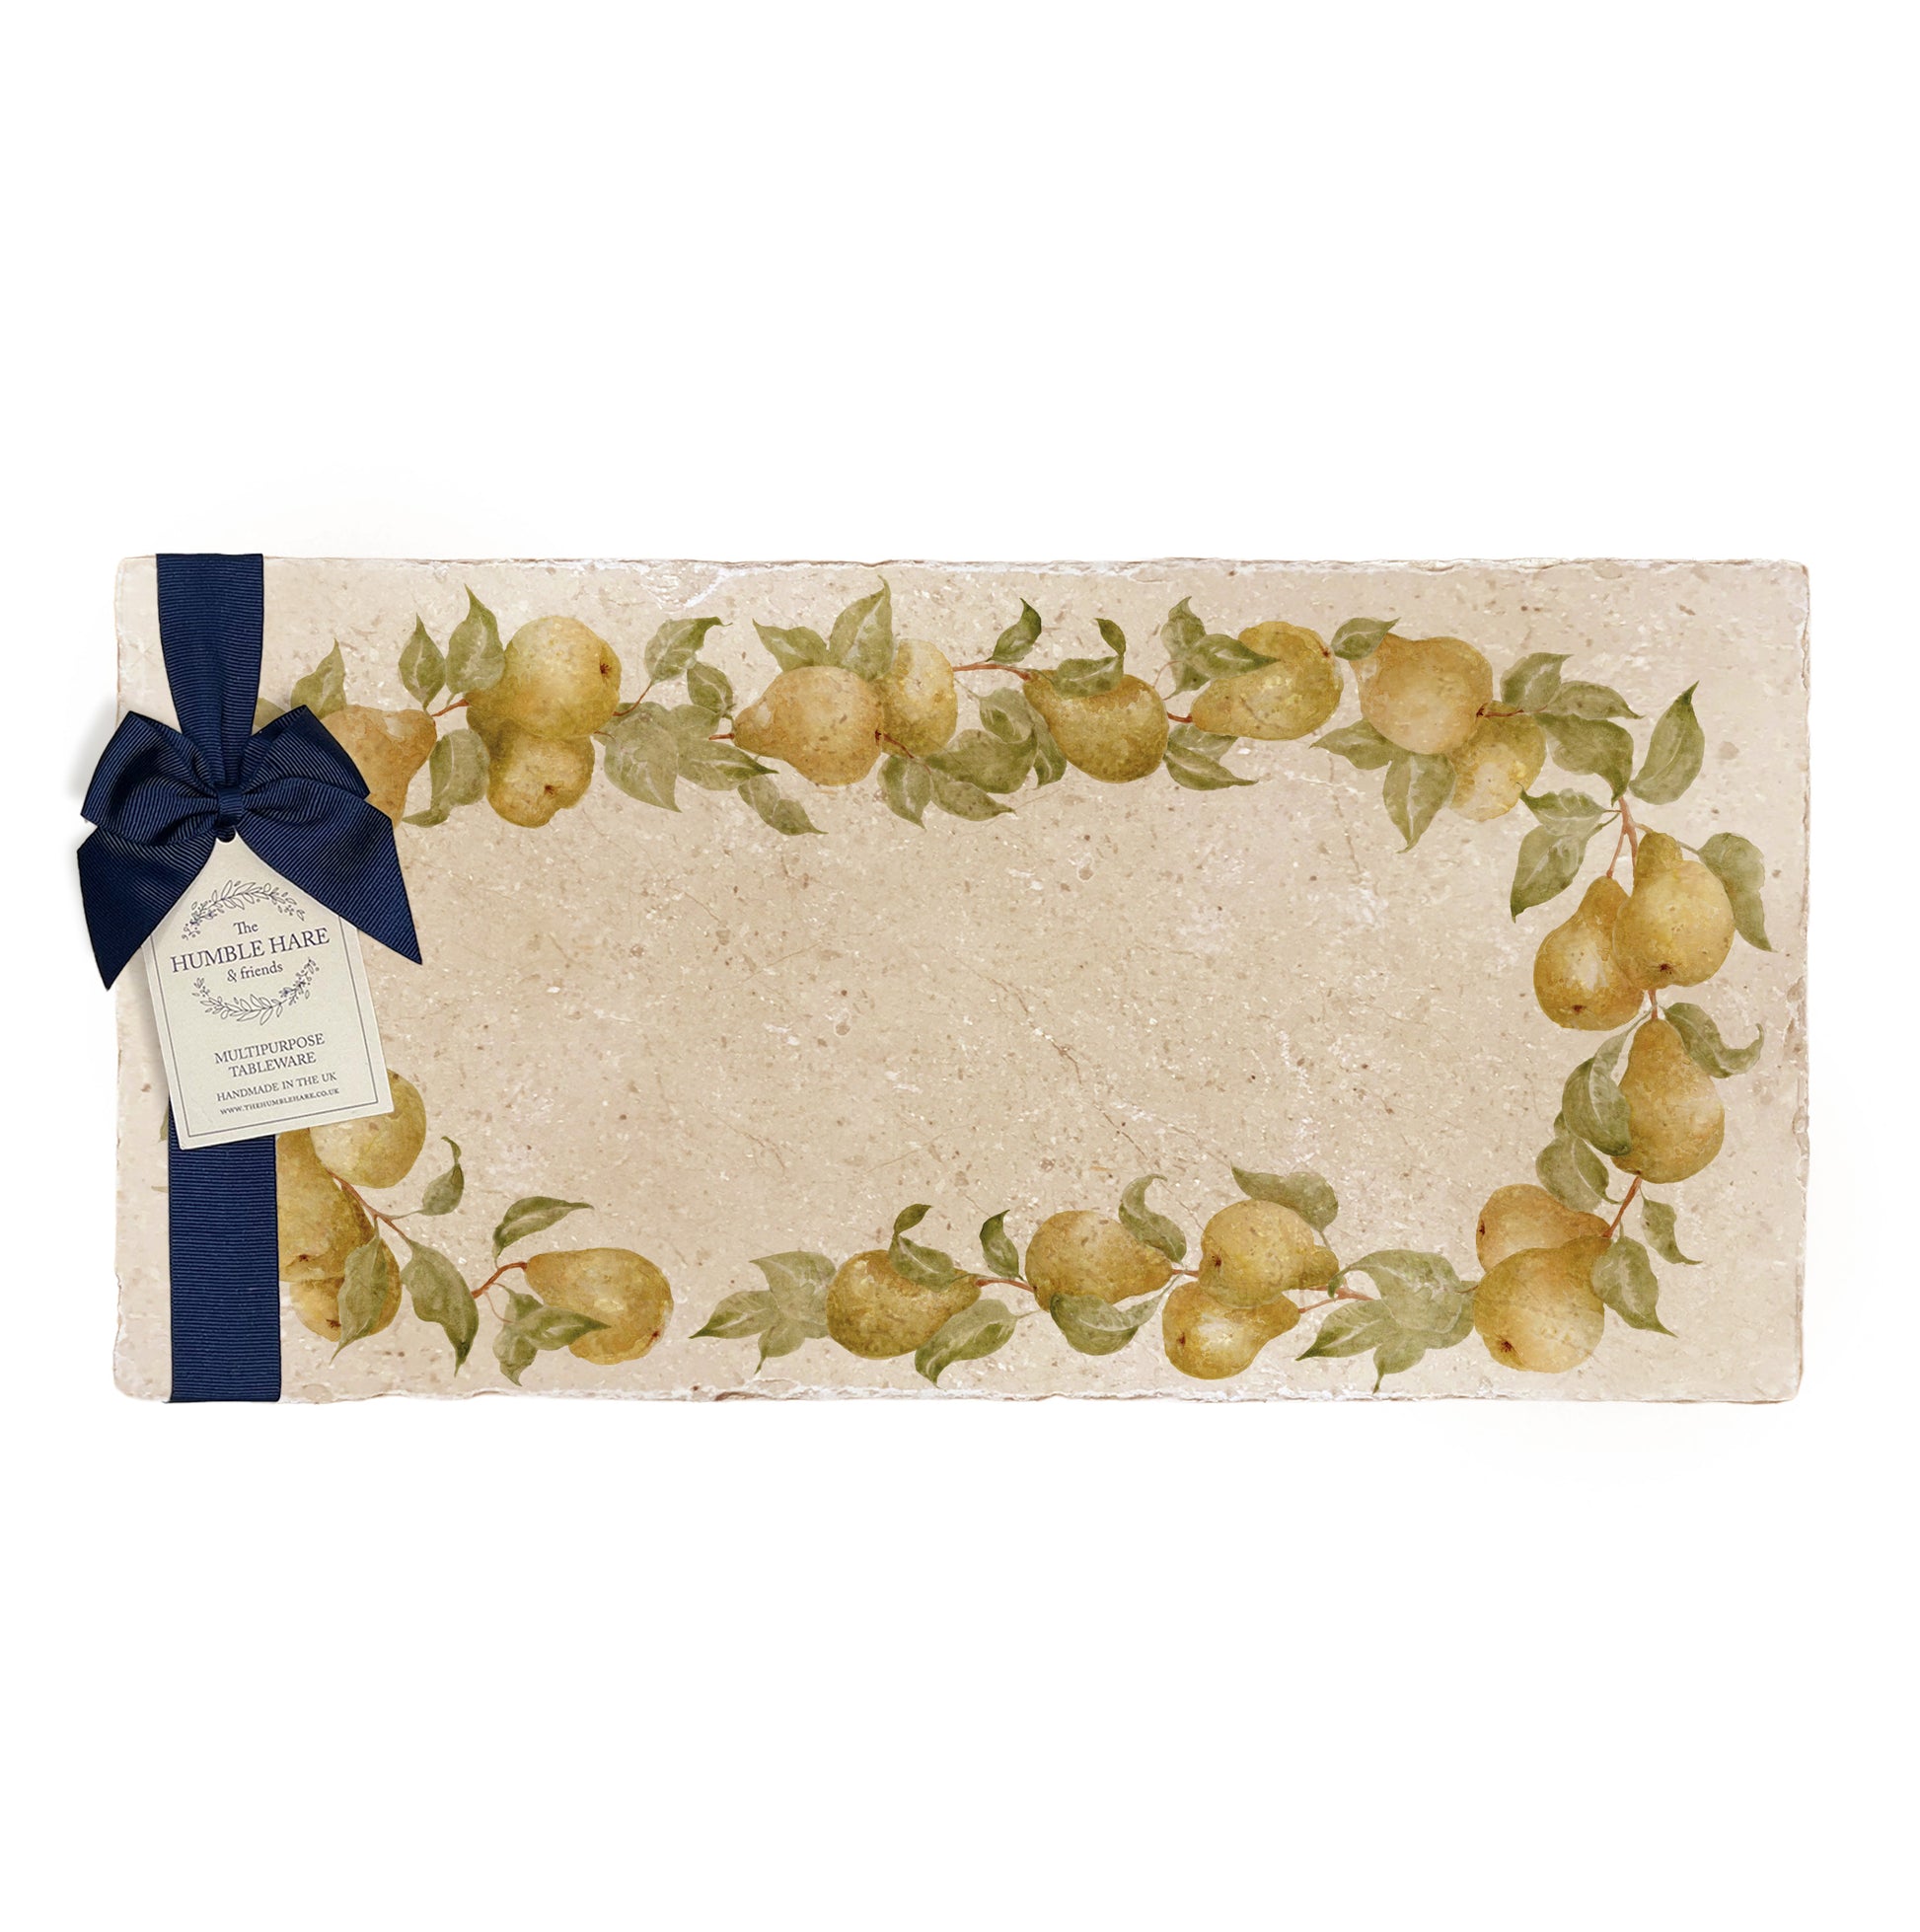 A multipurpose marble sharing platter with a watercolour pear wreath design, packaged with a luxurious dark blue bow and branded gift tag.